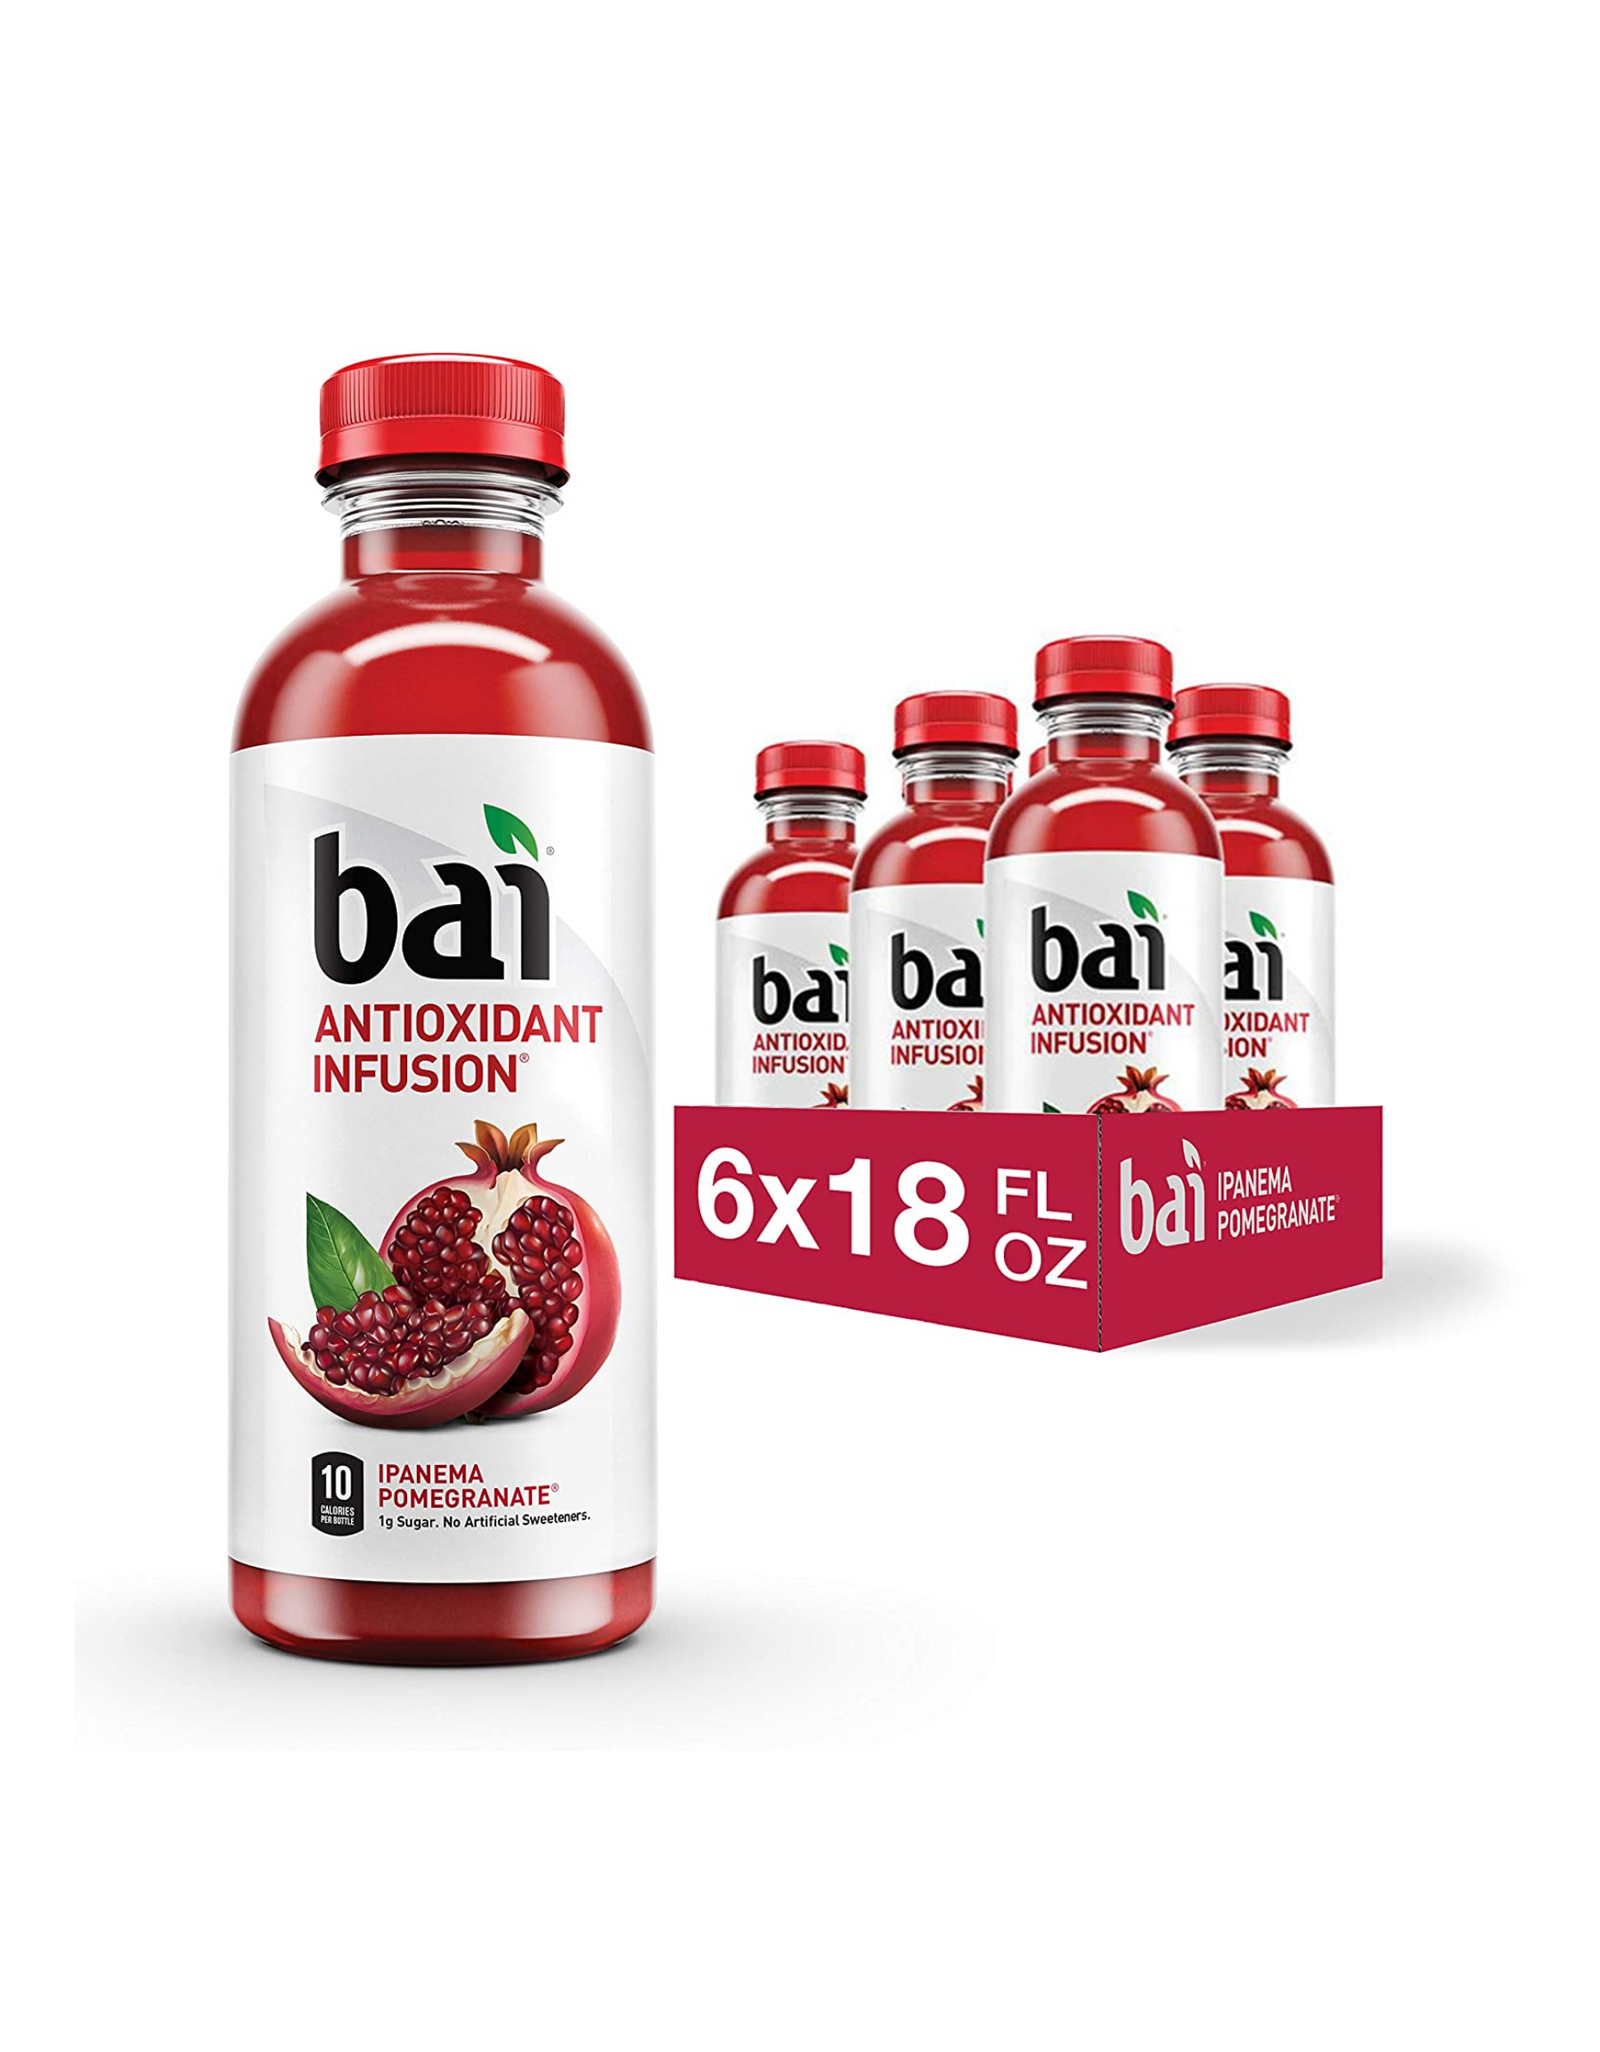 Bai Flavored Water, Ipanema Pomegranate, Antioxidant Infusion Drinks, 18 fl oz (Pack of 6)